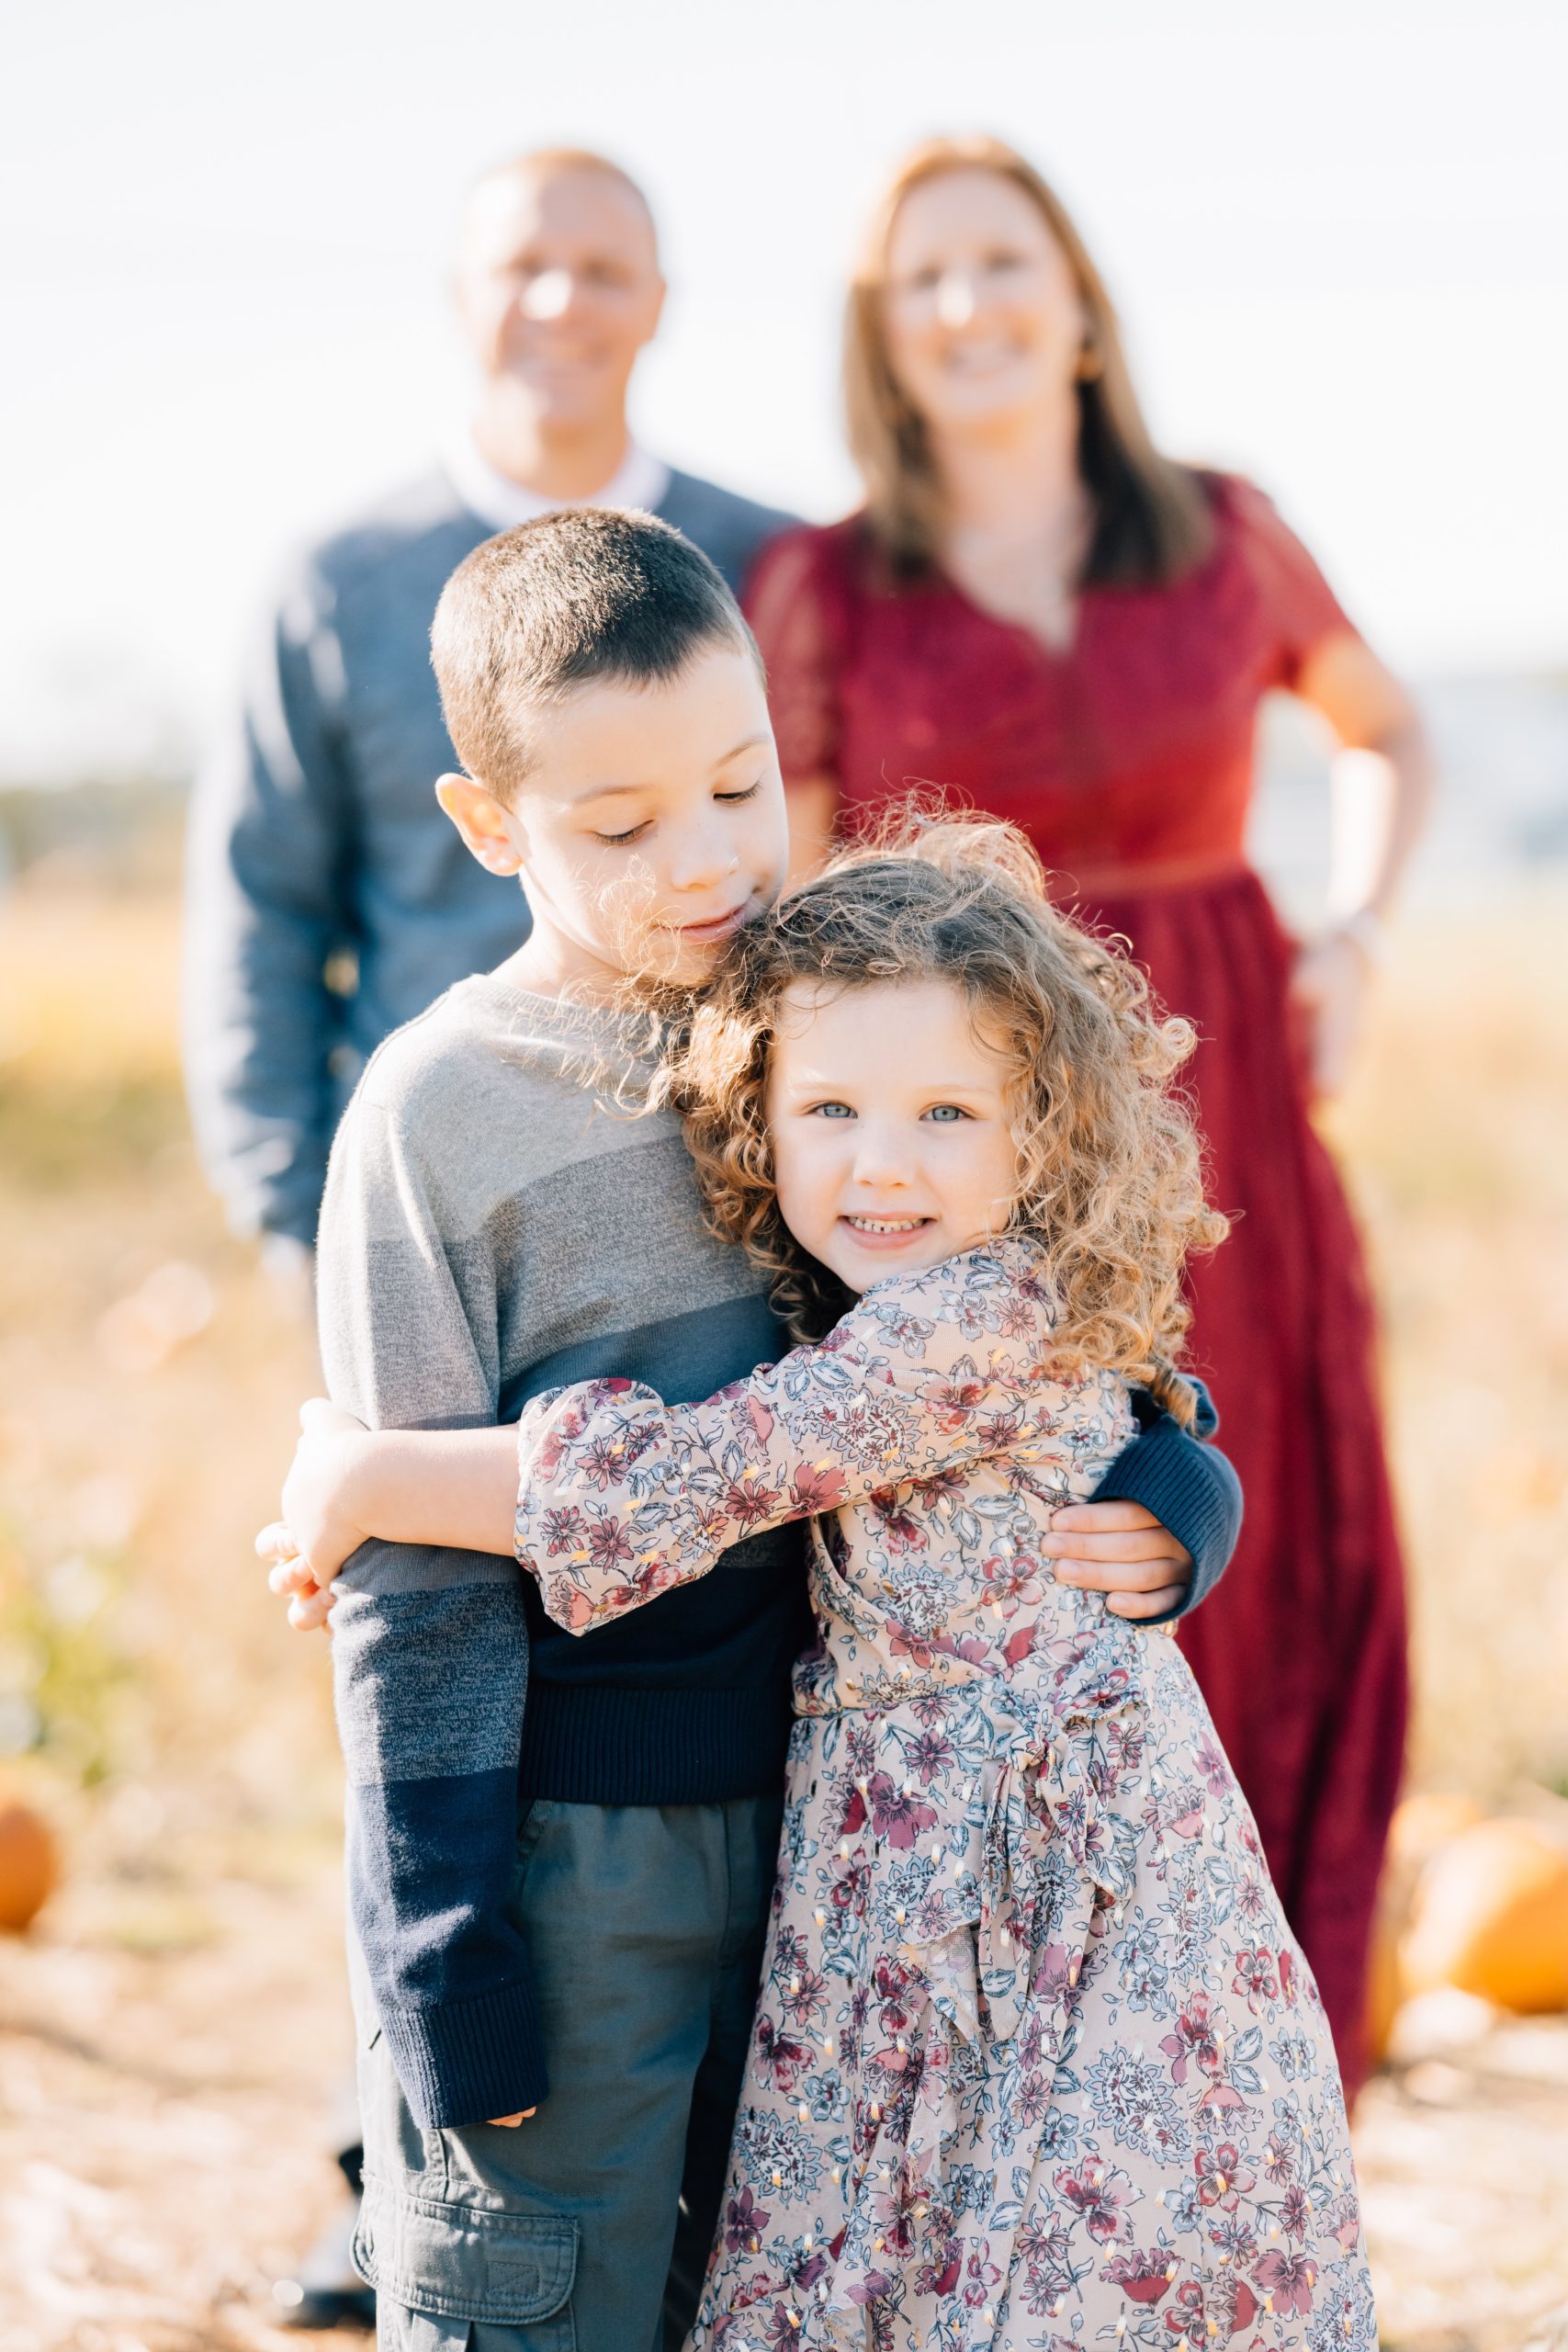 Family of 4 walks through pumpkin patch brother and sister hugging with mom and dad in background during fall mini portrait session at Pumpkin Junction at Everitt Farms in Flemington, NJ Ringoes, NJ with Motherhood and Family Photographer Anne Haug of Golden Heart Photography.